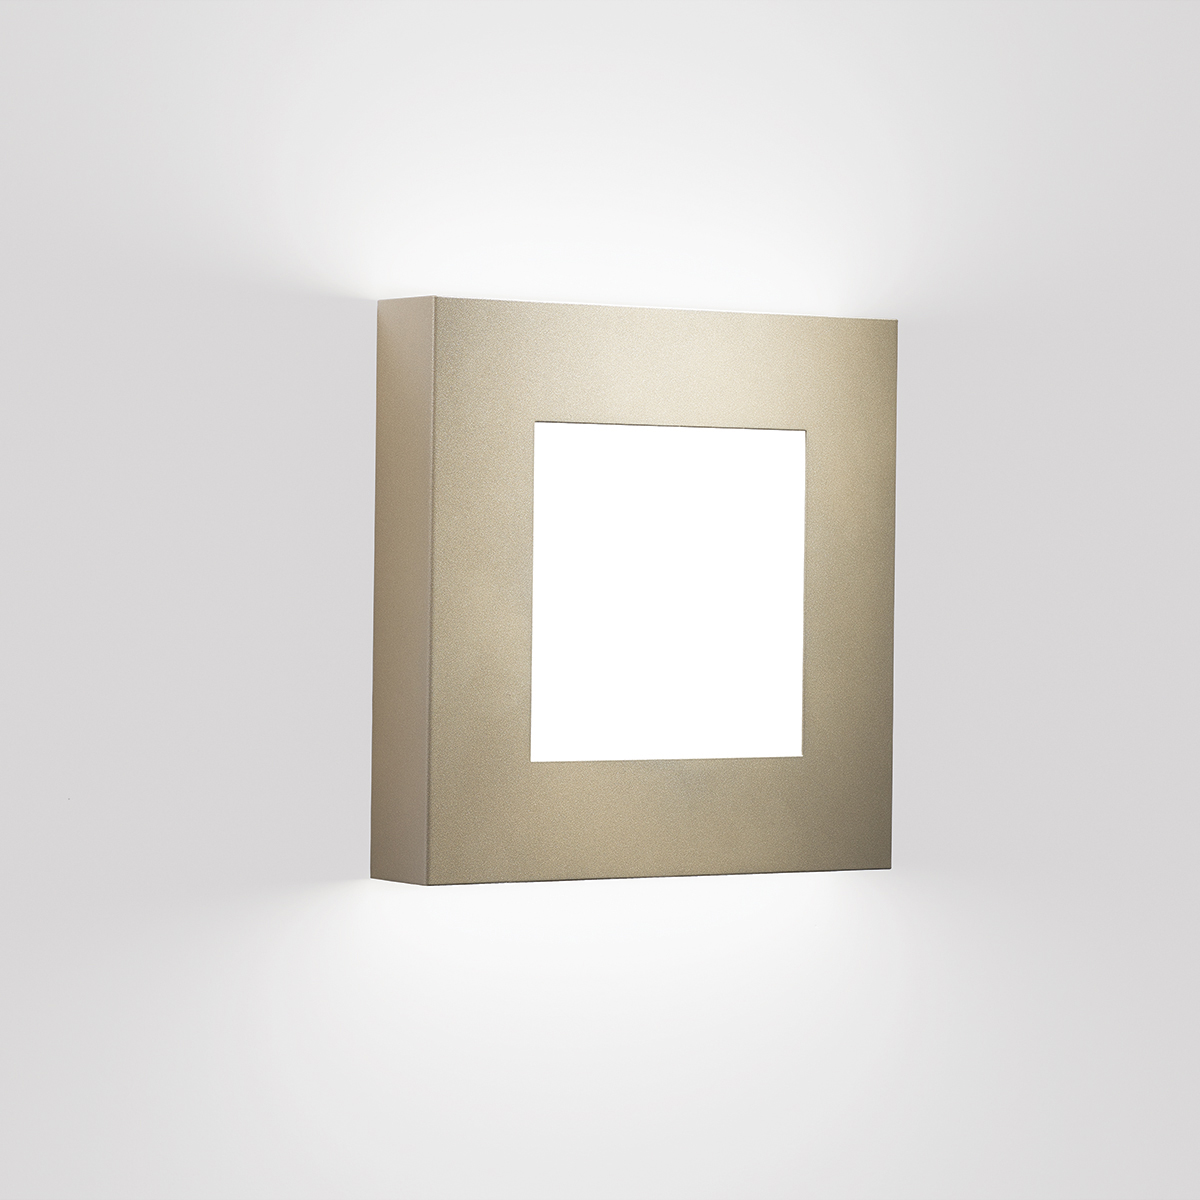 A square wall sconce with a diffuser window